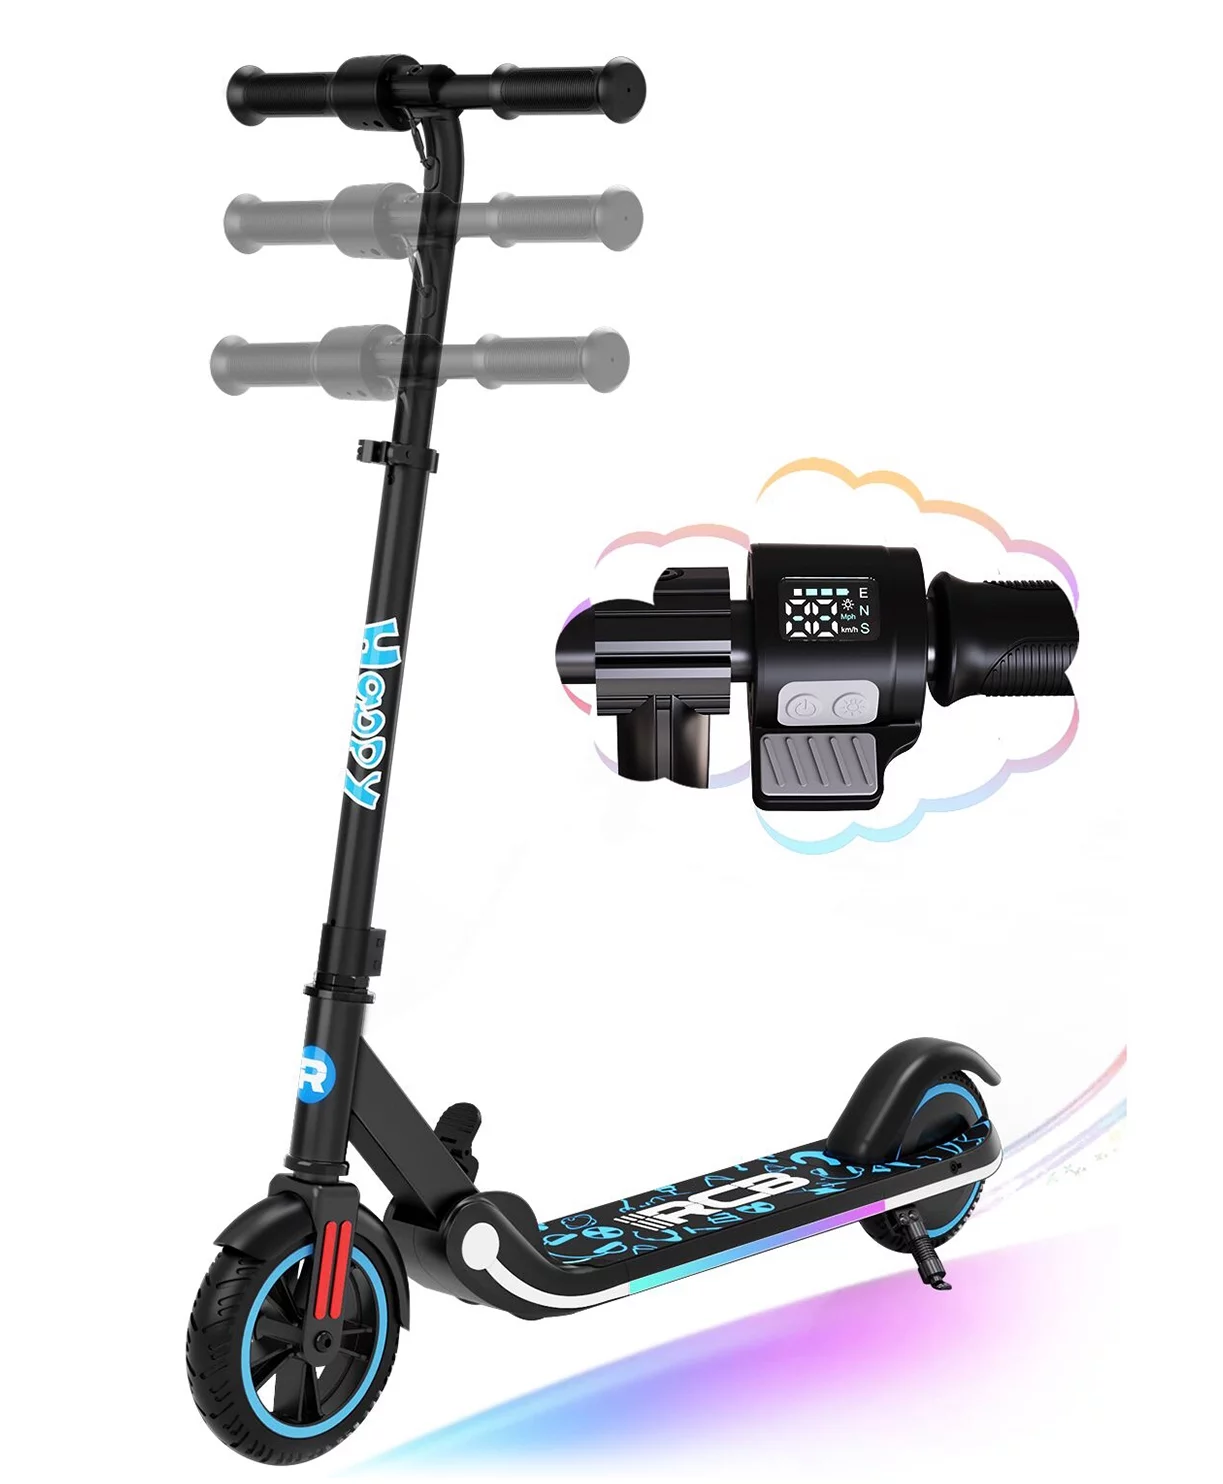 RCB Electric Scooter, for Kids Ages 6+, 3 Speeds and Height Adjustable,Vibrant Lights,Black